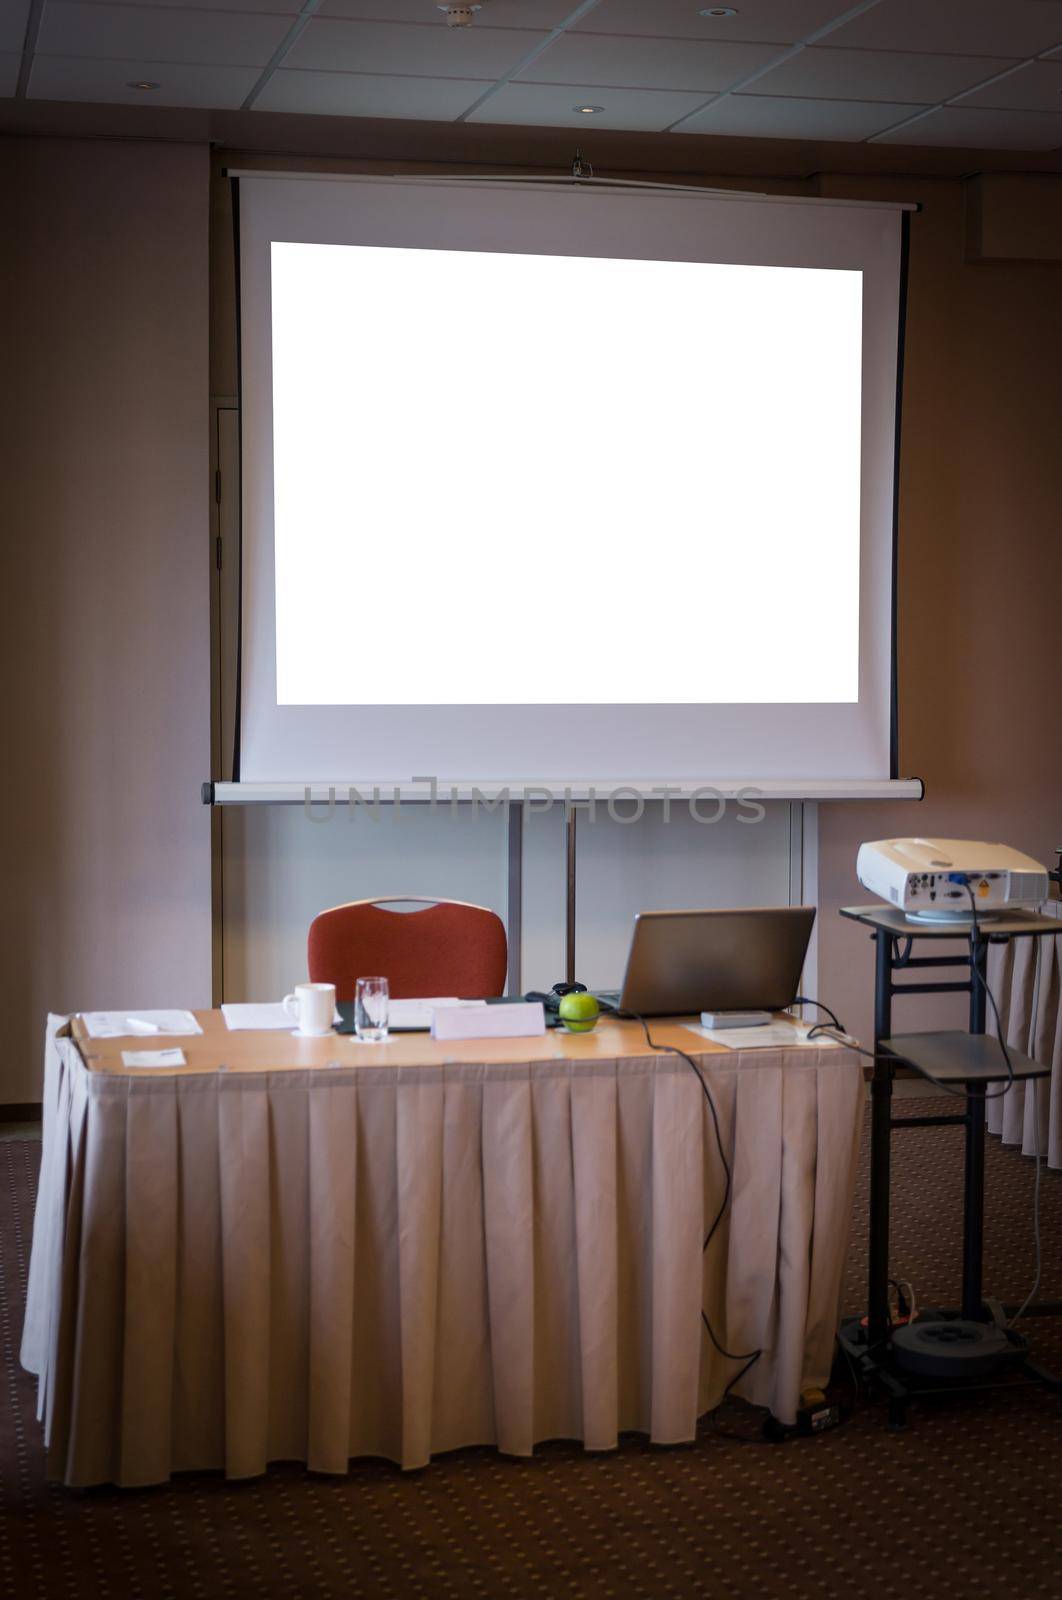 Presentation room with a projector and computer